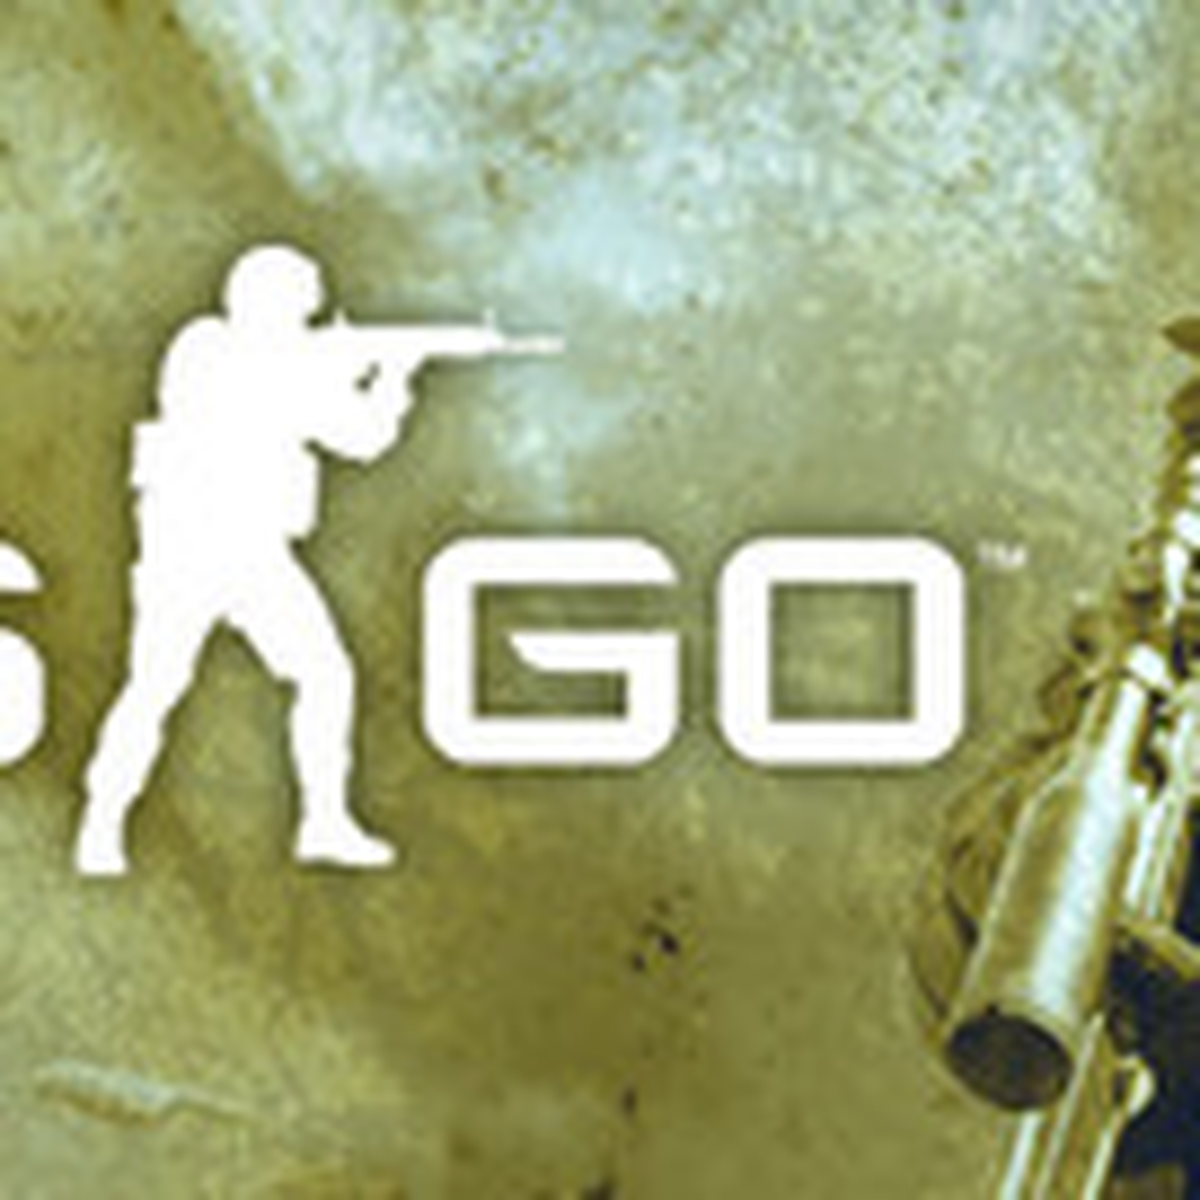 Counter-Strike: Global Offensive coming Aug. 21 to PS3, 360 and Steam Aug.  21 - Polygon